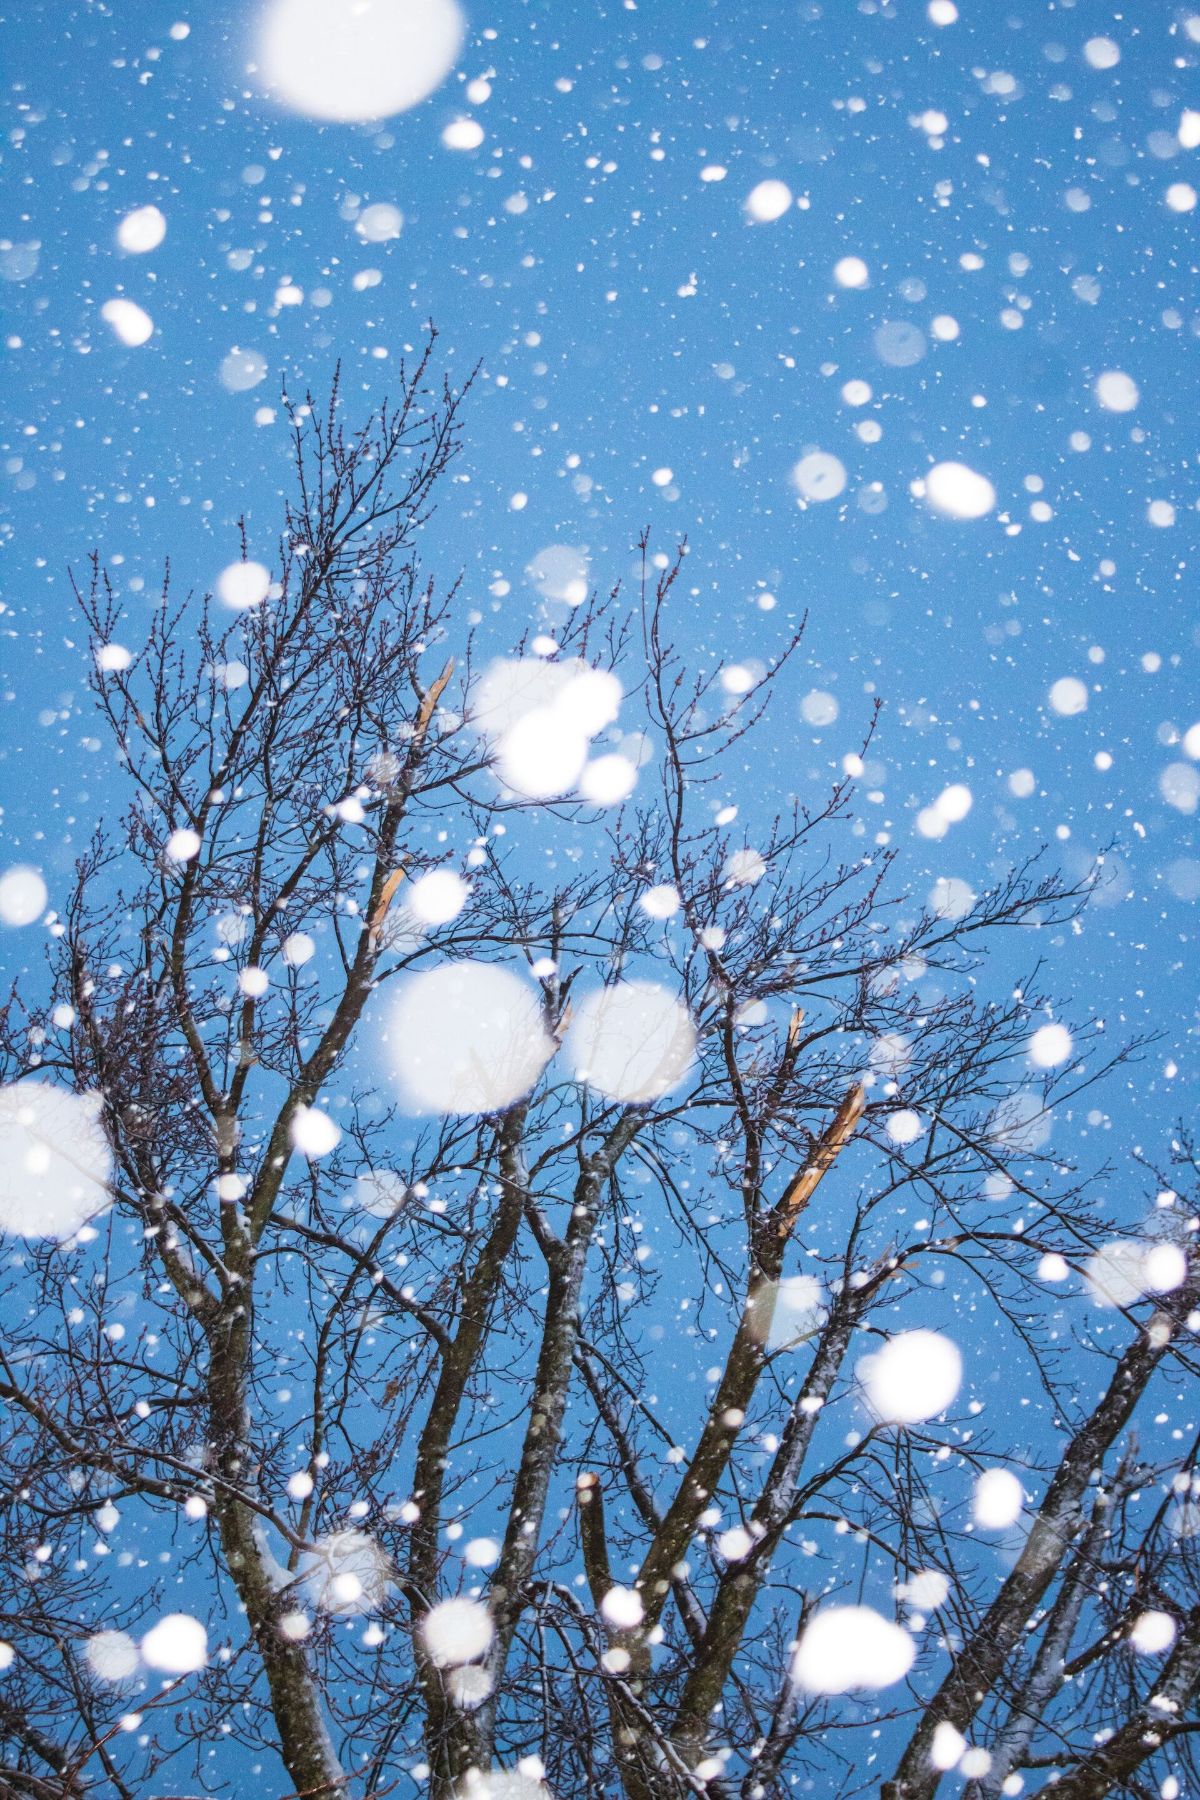 Snow falling in front of a black leafless tree at twilight. The sky behind it is baby blue.